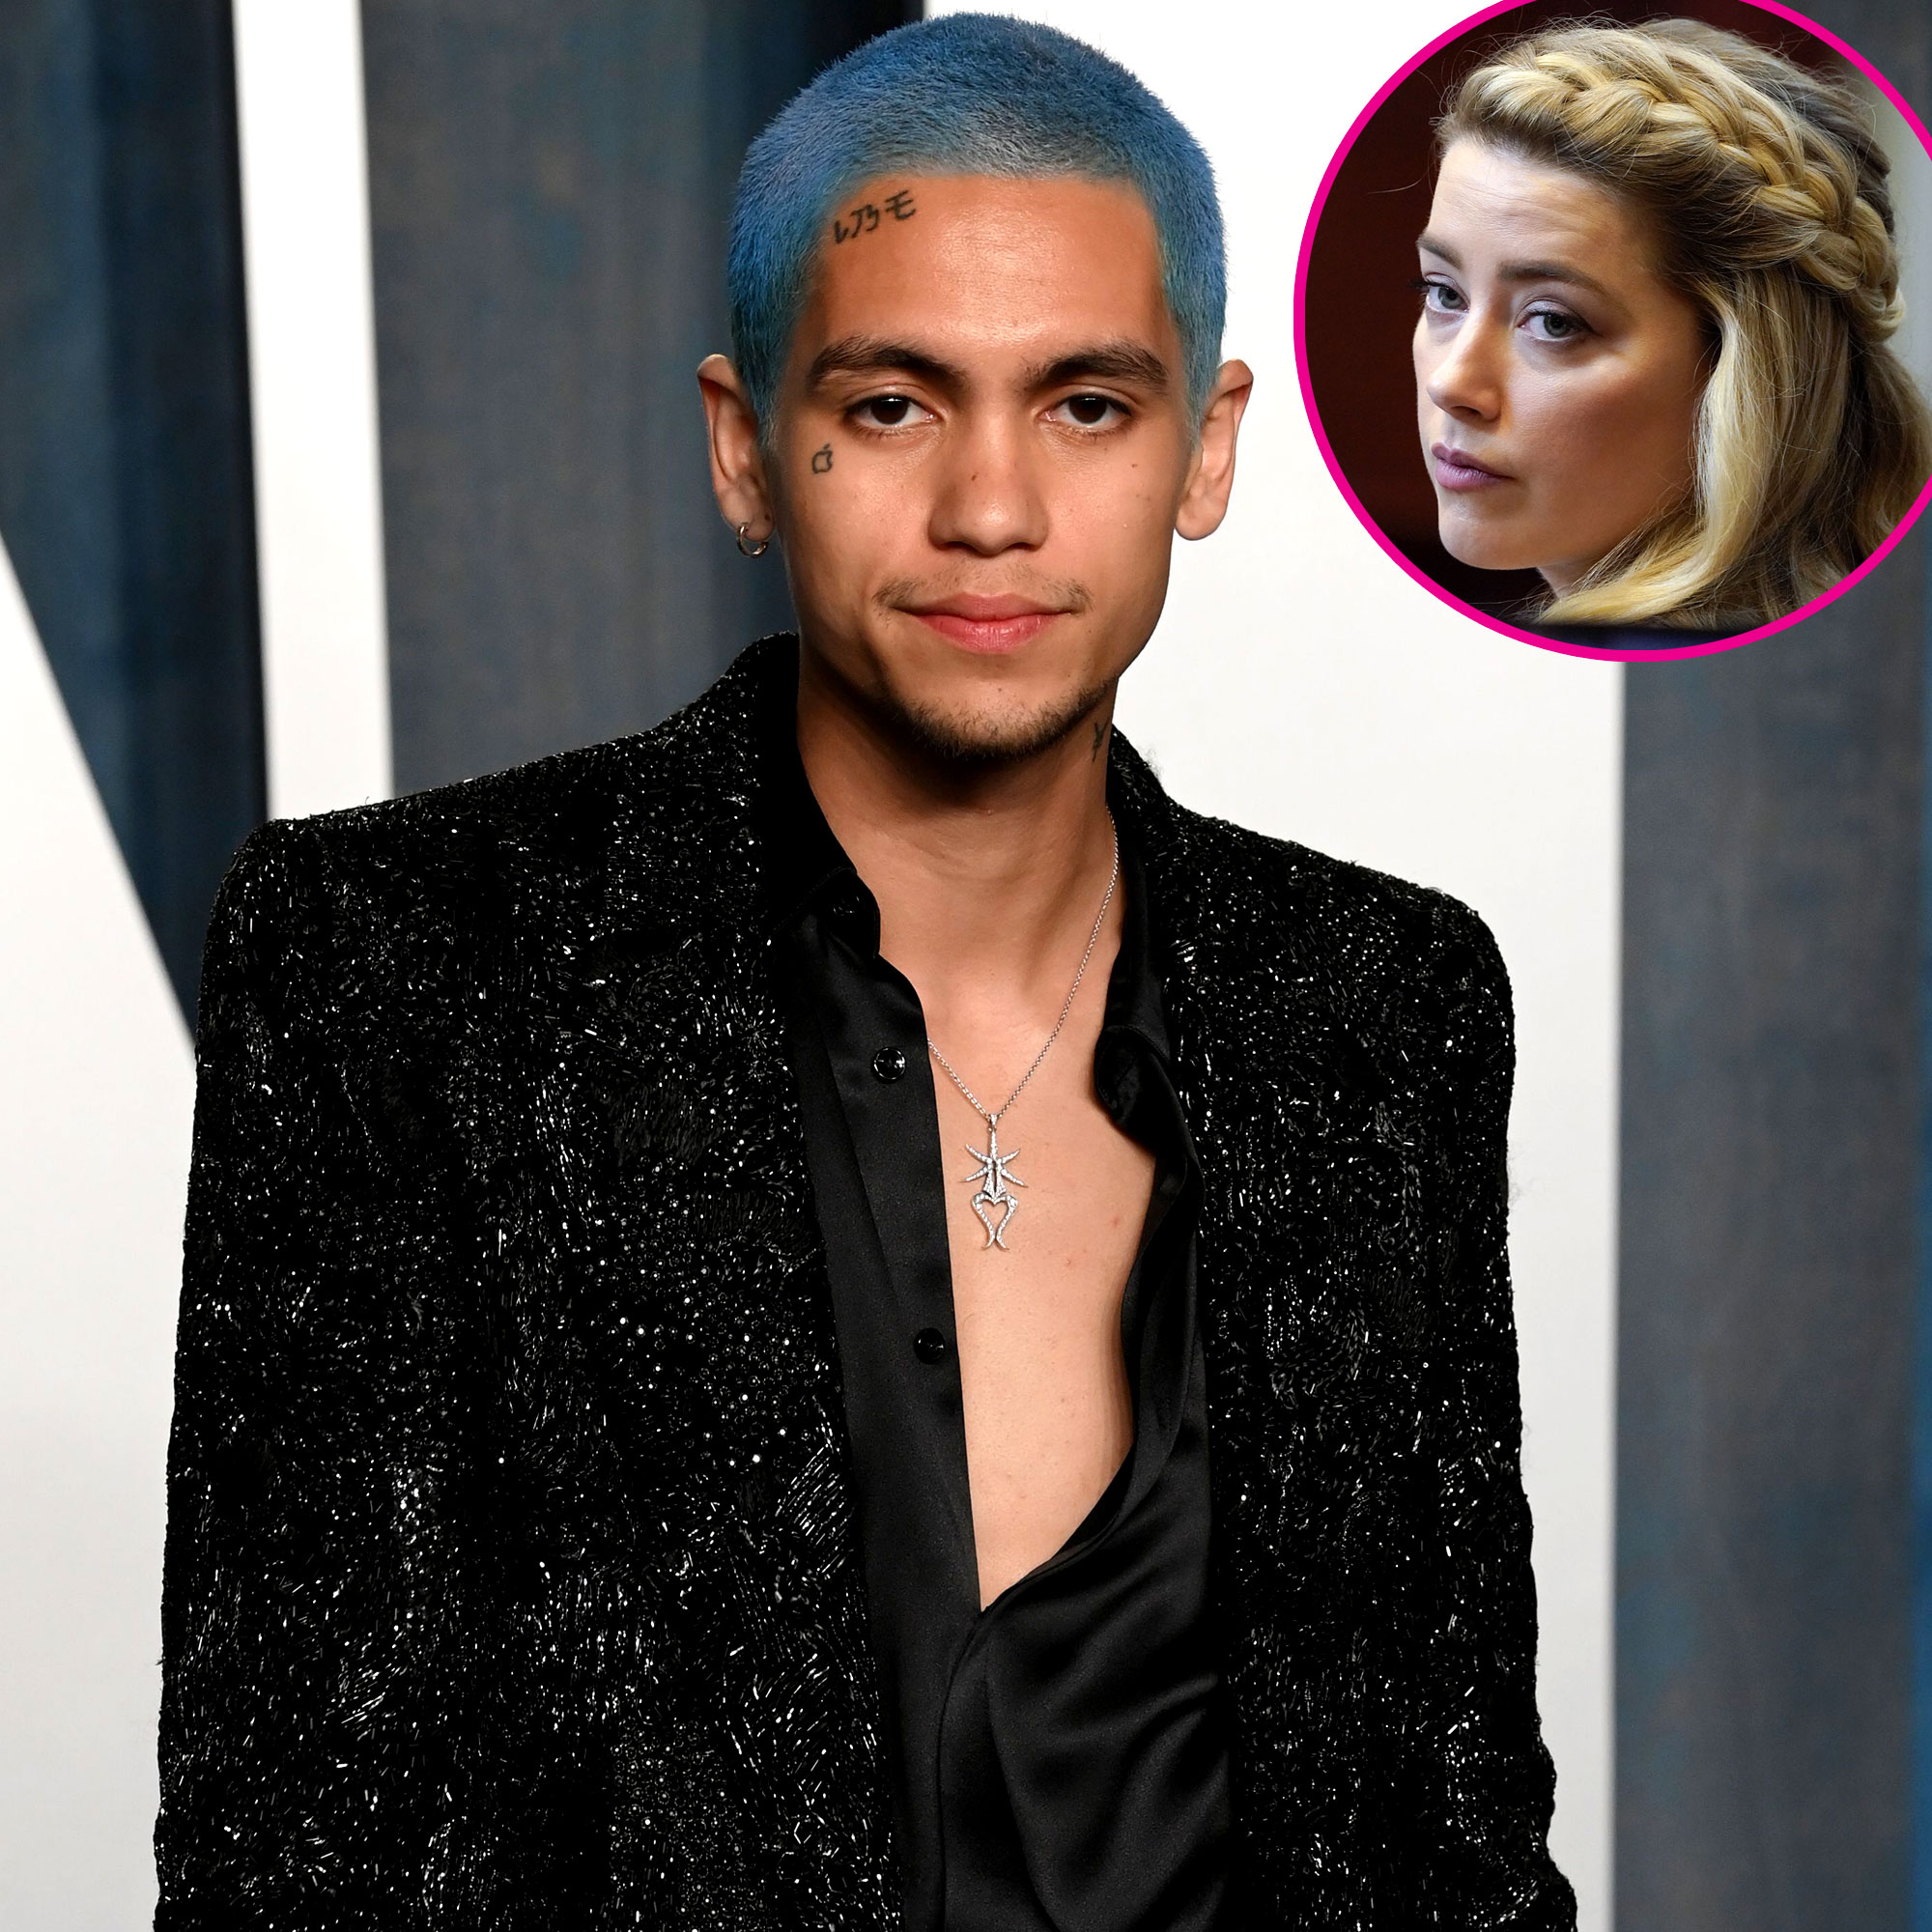 Dominic Fike of Amber Heard 'Beating' Him Up: 'It's Hot'